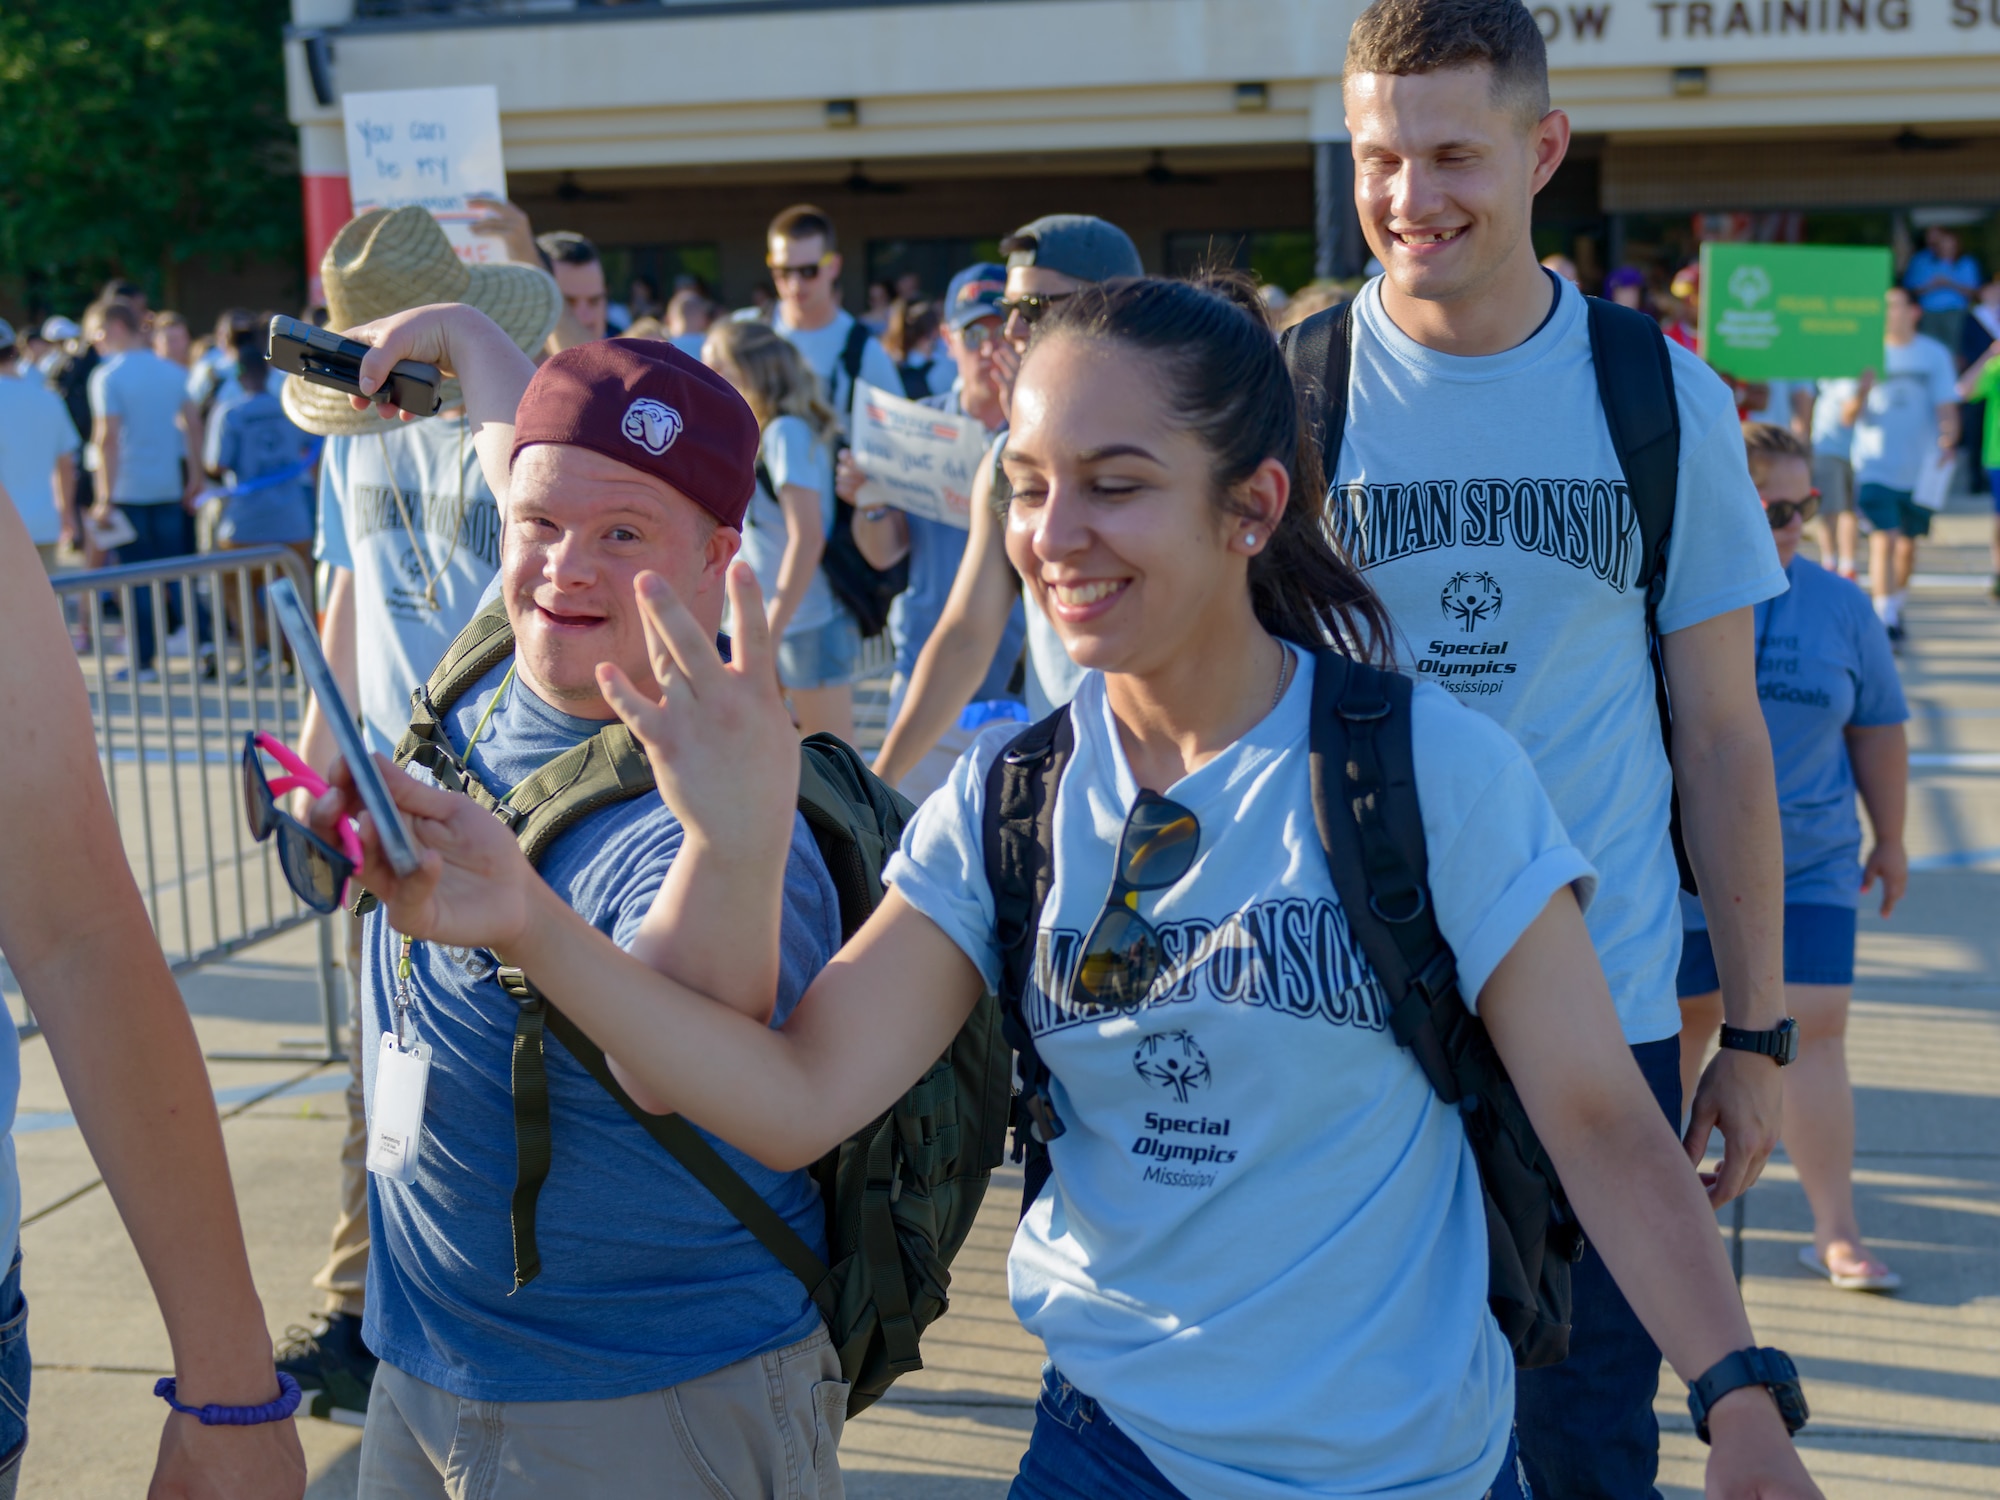 Airmen sponsors and athletes walk onto the Levitow Training Support Facility drill page during the Special Olympics Mississippi 2018 Summer Games opening ceremonies May 11, 2018, on Keesler Air Force Base, Miss. Founded in 1968, Special Olympics hosts sporting events around the world for people of all ages with special needs to include more than 700 athletes from Mississippi. (U.S. Air Force photo by Andre Askew)